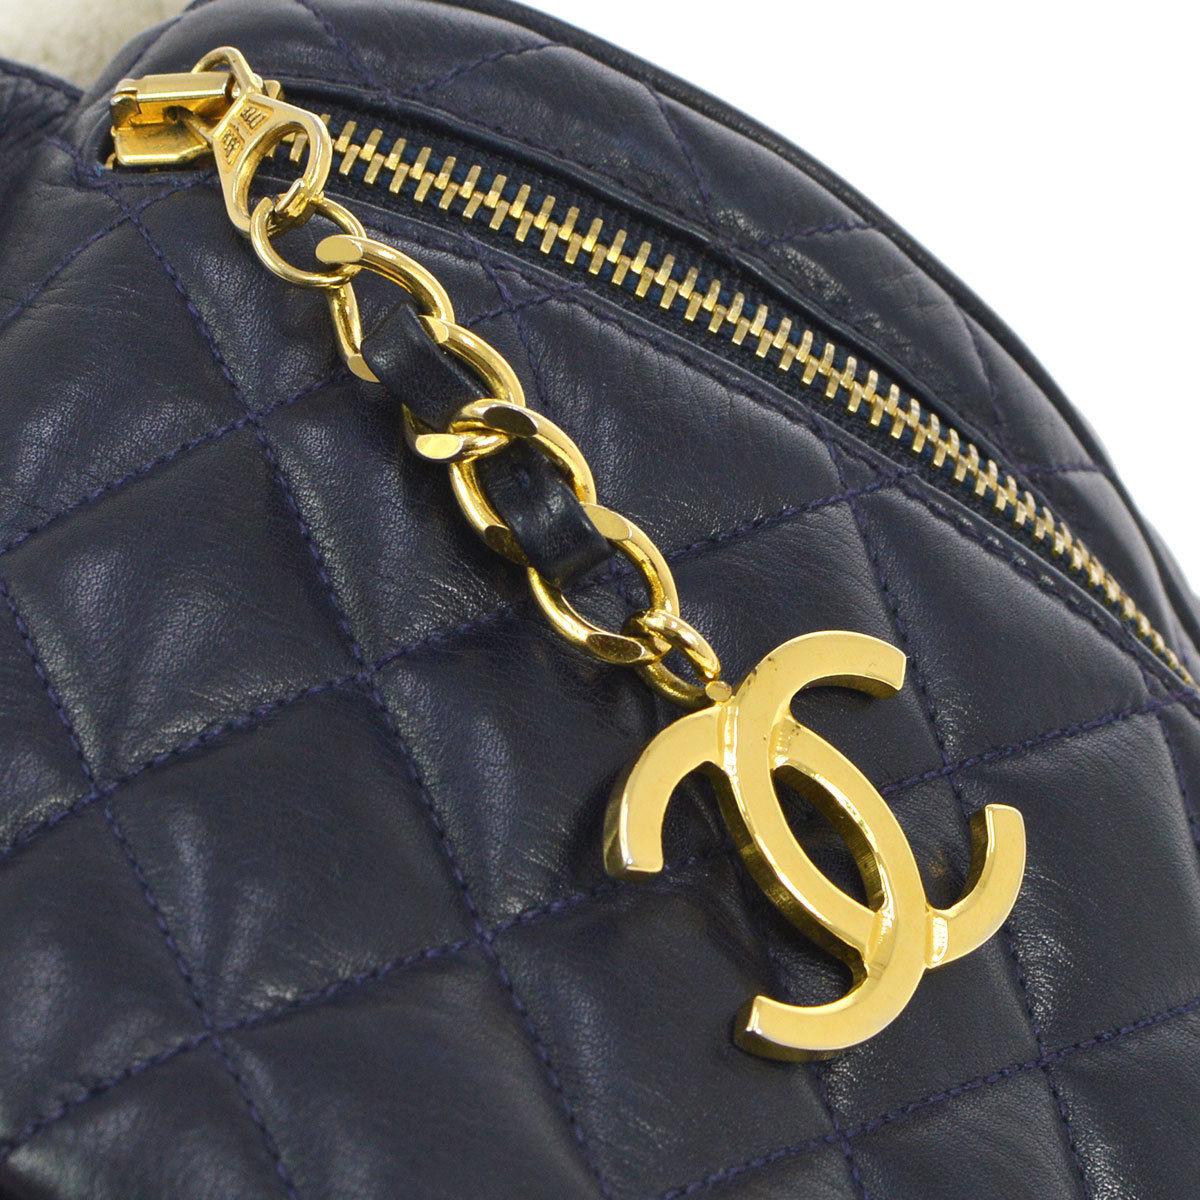 Chanel 1991 Navy Blue Quilted Lambskin Vintage Fanny Pack Waist Belt Bum Bag In Good Condition For Sale In Miami, FL